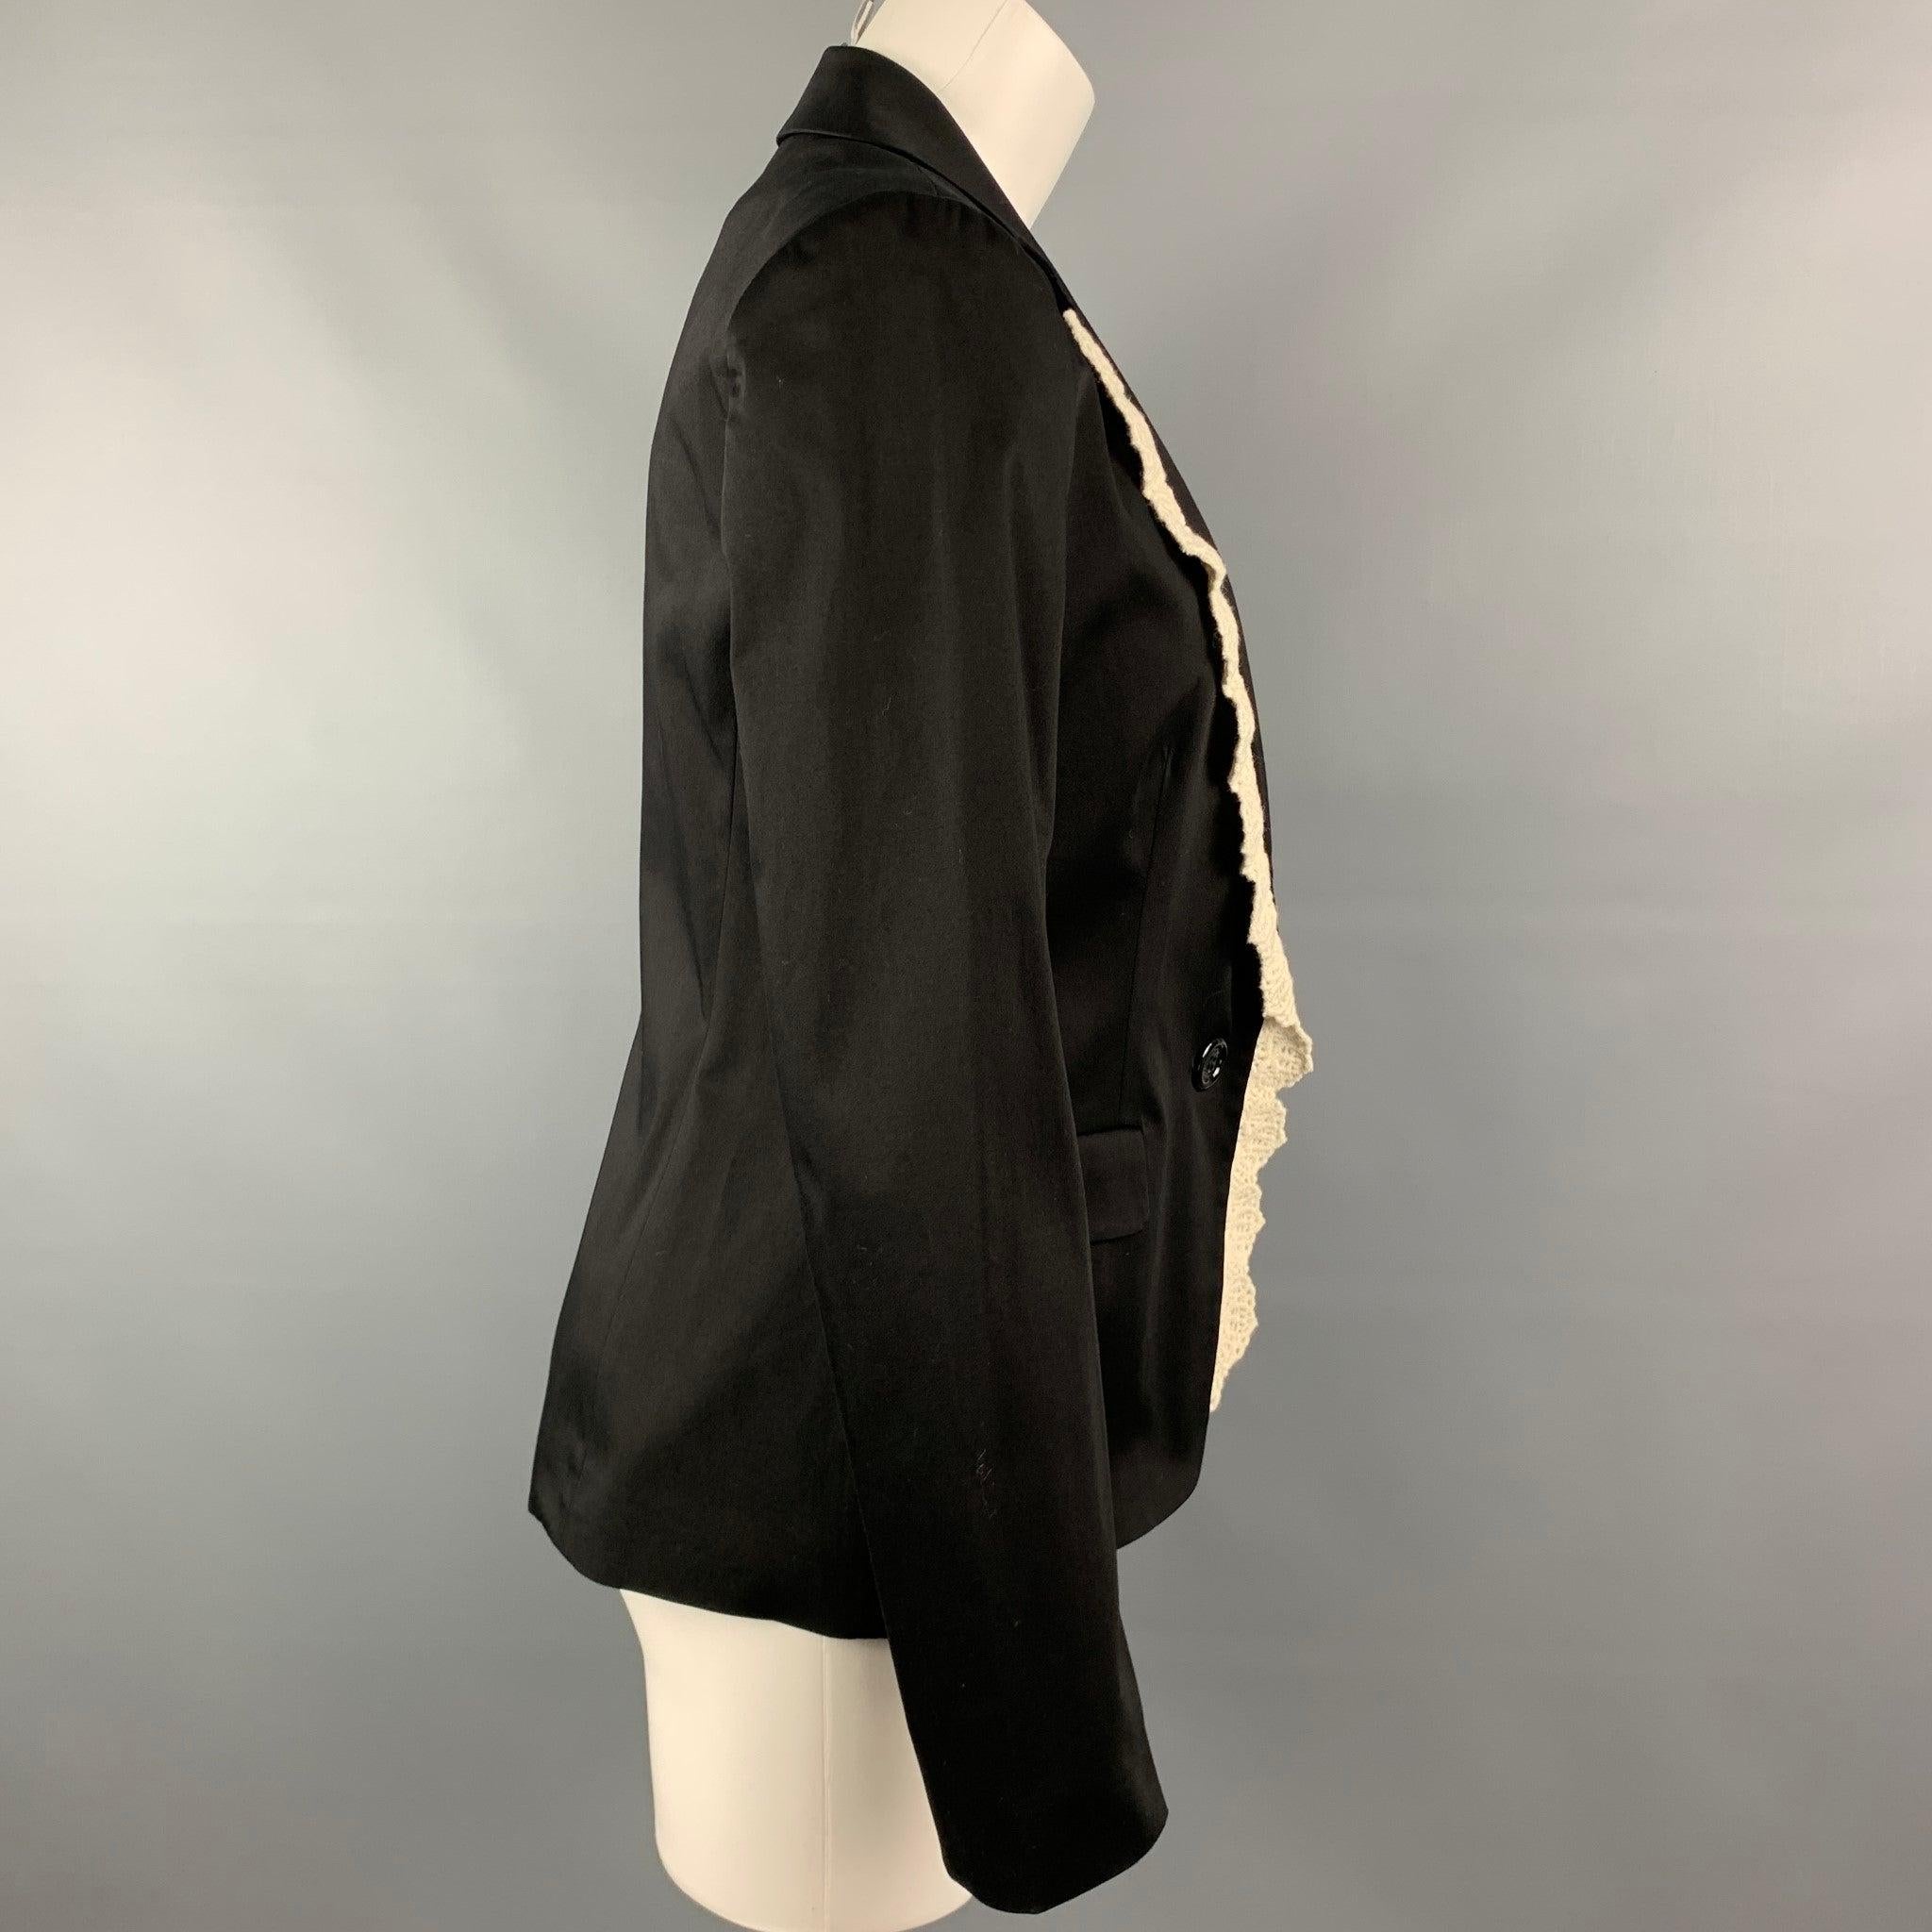 LOVE MOSCHINO Size 6 Black & White Acetate / Cotton Jacket In Excellent Condition For Sale In San Francisco, CA